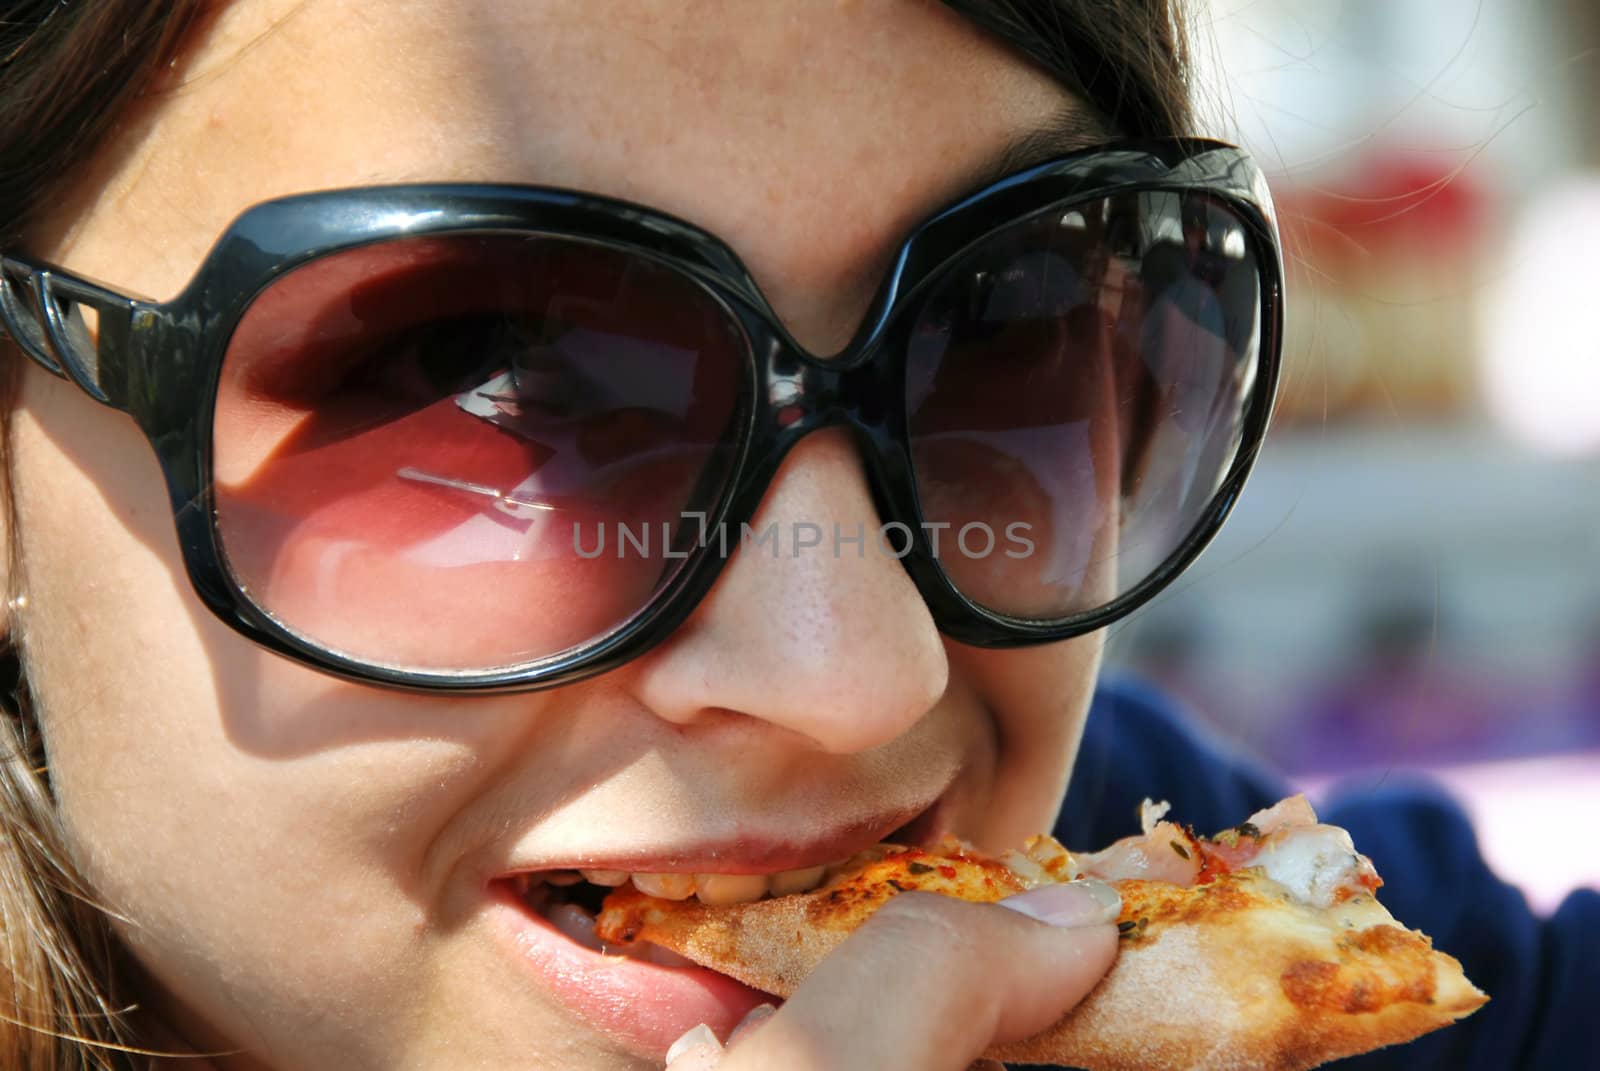 Eating pizza by simply